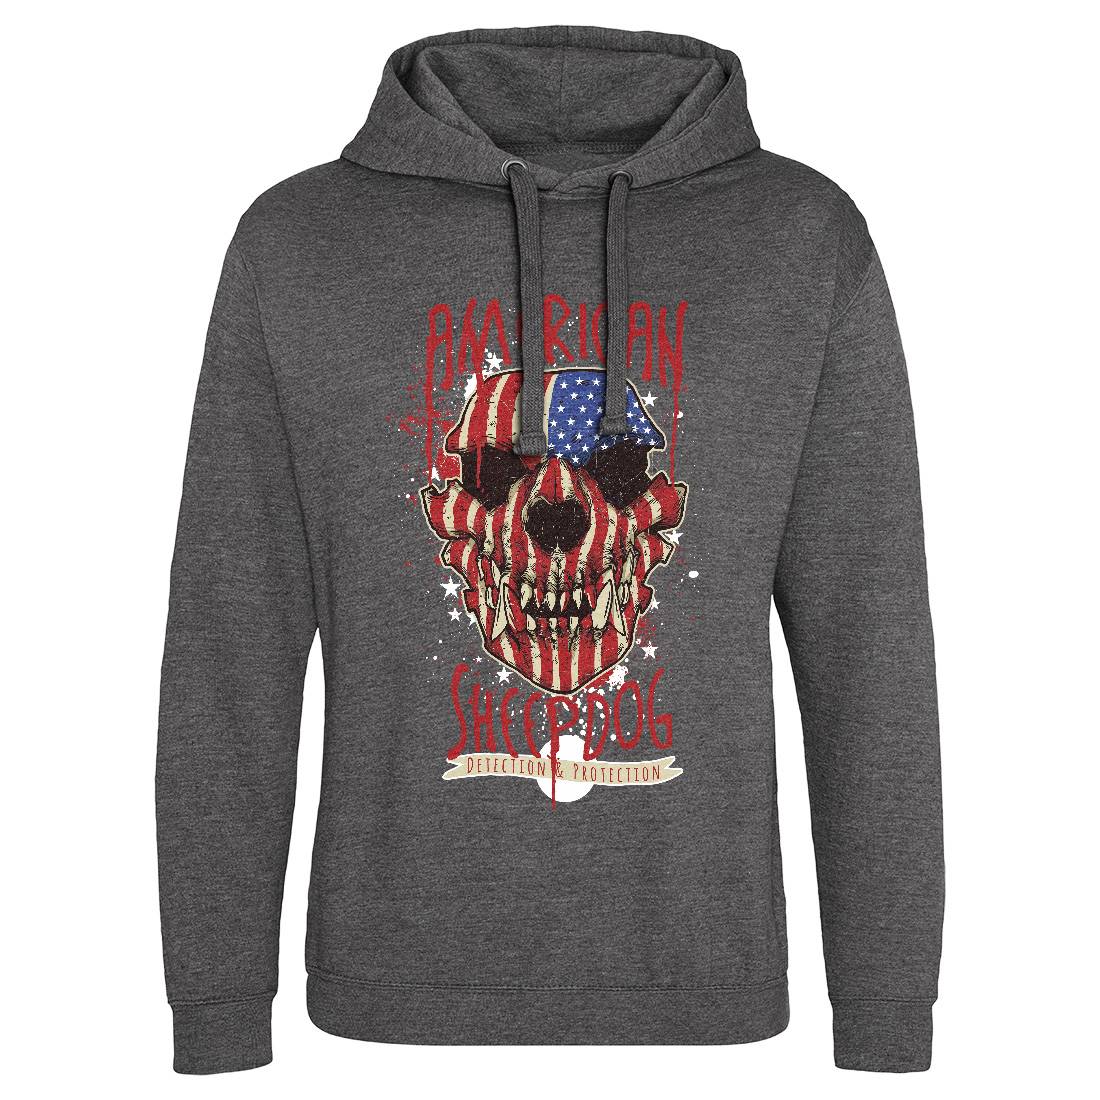 Sheepdog Mens Hoodie Without Pocket American C905